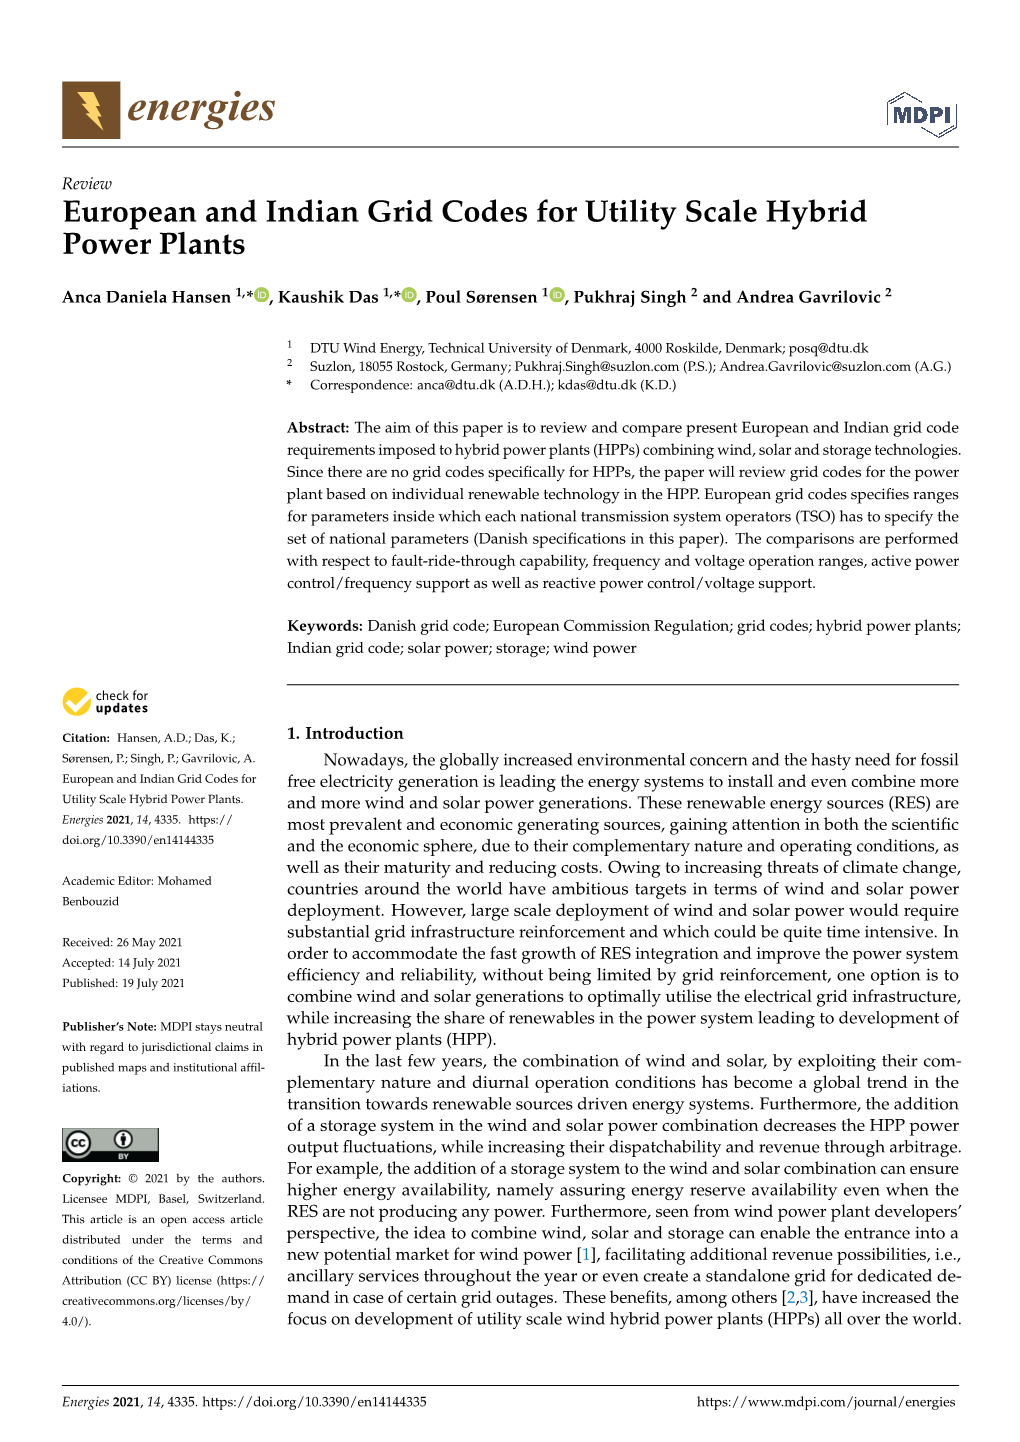 European and Indian Grid Codes for Utility Scale Hybrid Power Plants